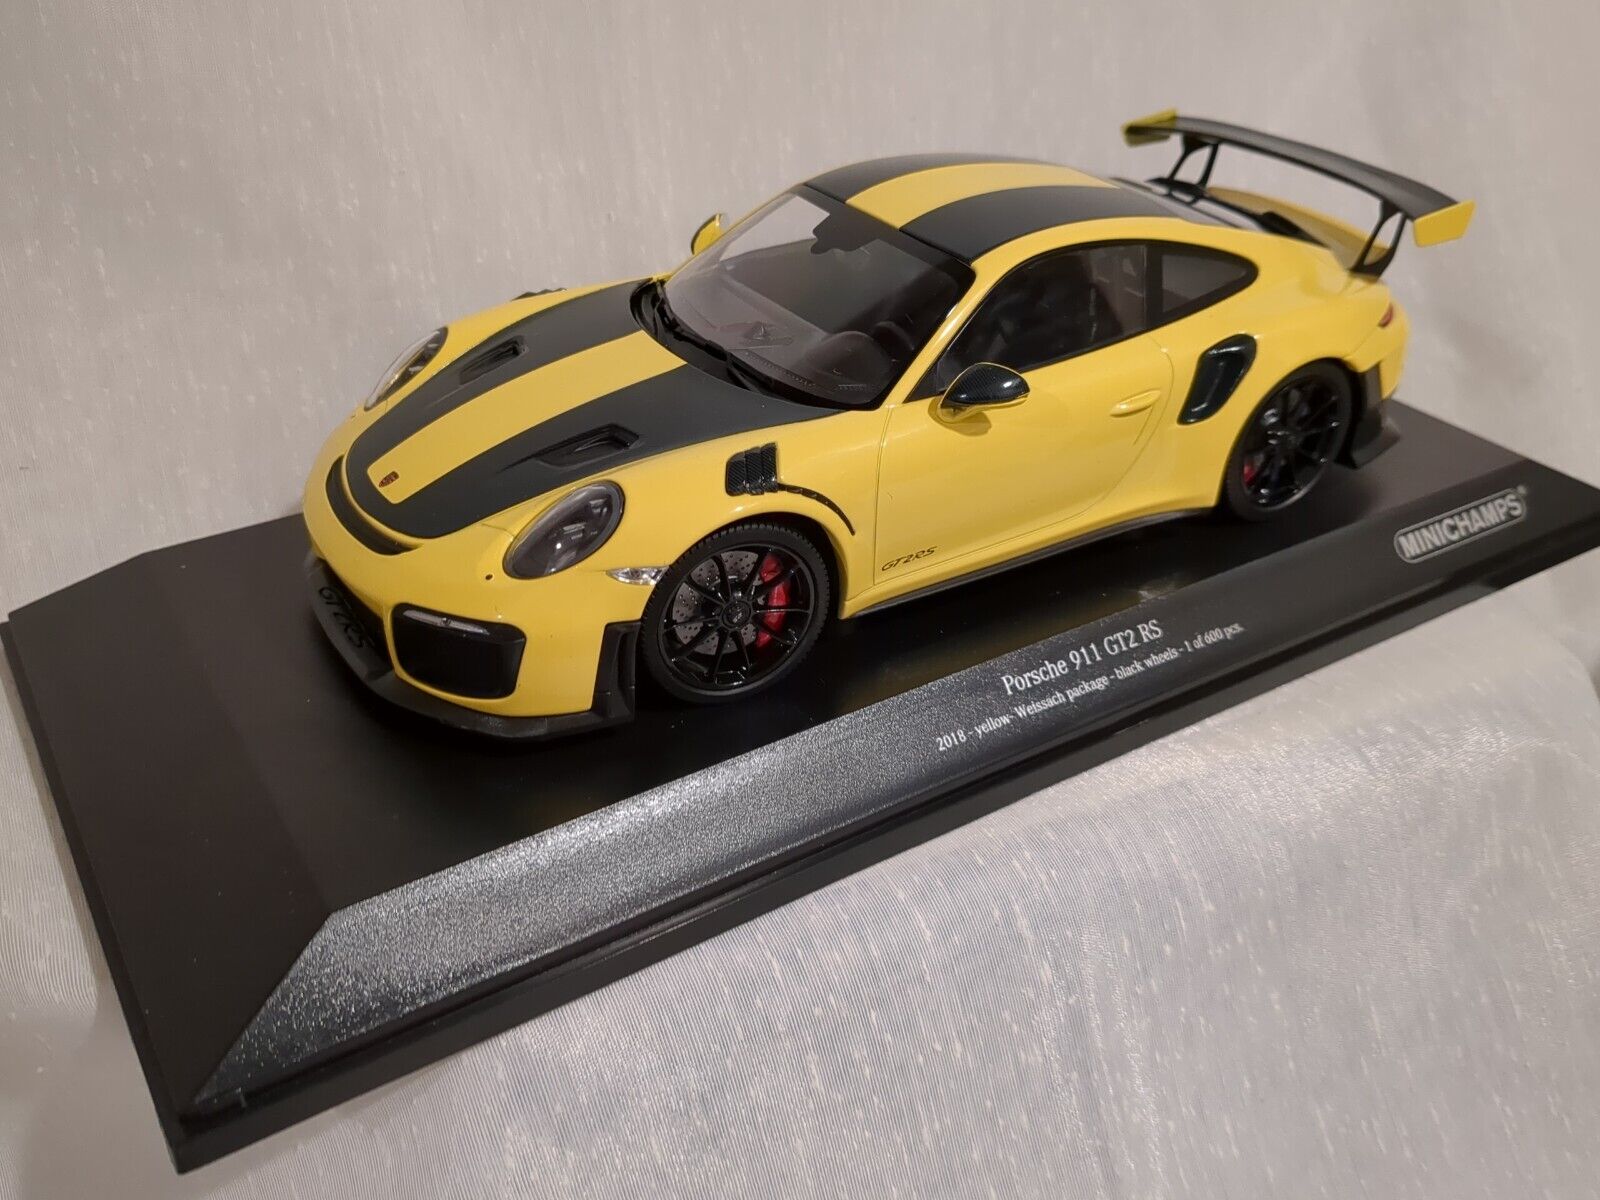 Awesome Minichamps 1/18 Scale 1 of 600 Porsche 911 GT2 RS Weissach 2018 Yellow